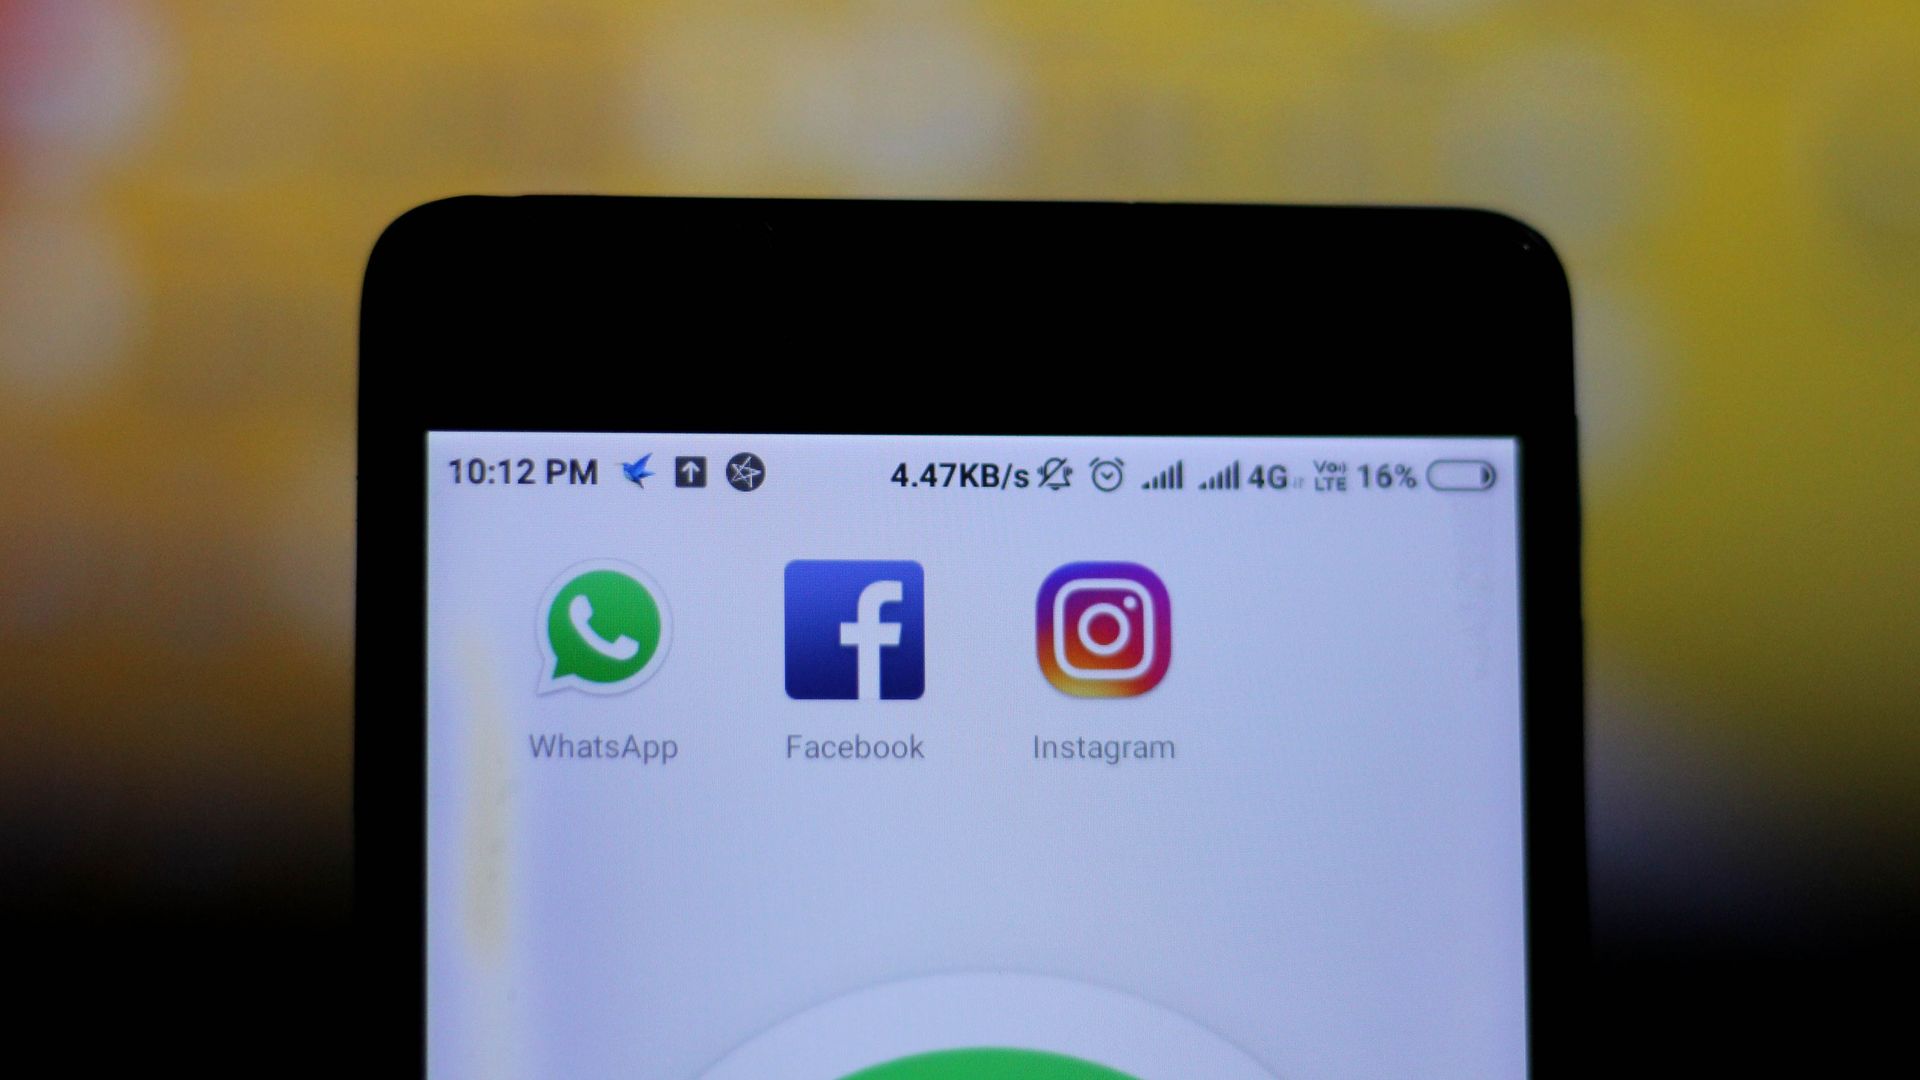 In this image, someone holds a phone up to the camera and three apps are displayed: WhatsApp, Facebook, and Instagram.